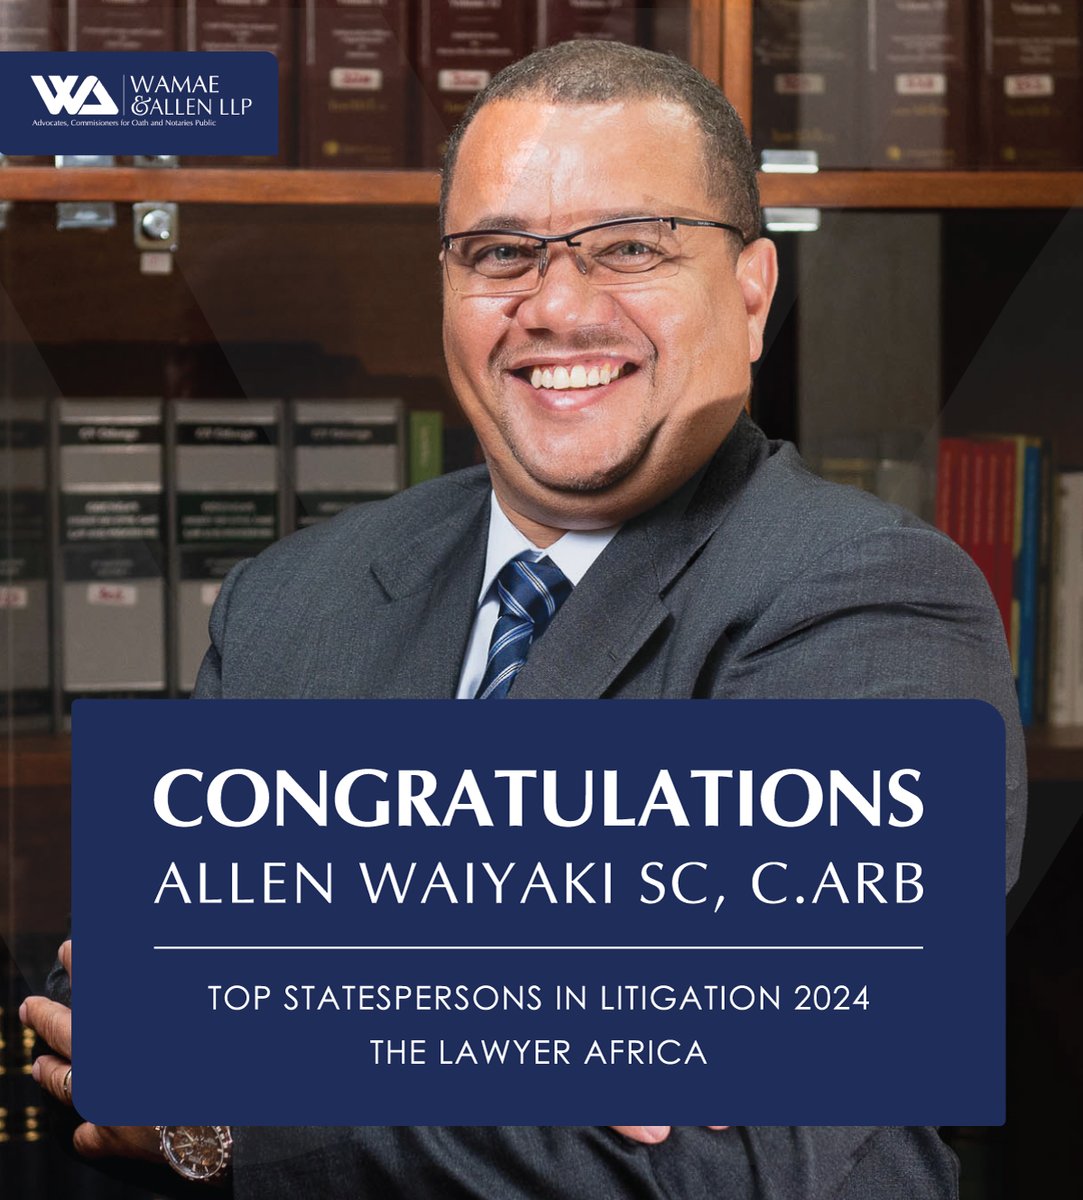 Congratulations to our Senior Partner Allen Waiyaki SC, C.Arb for being recognized as the Top Statesperson in Litigation 2024 by The Lawyer Africa

#LitigationExcellence #onwardandupward